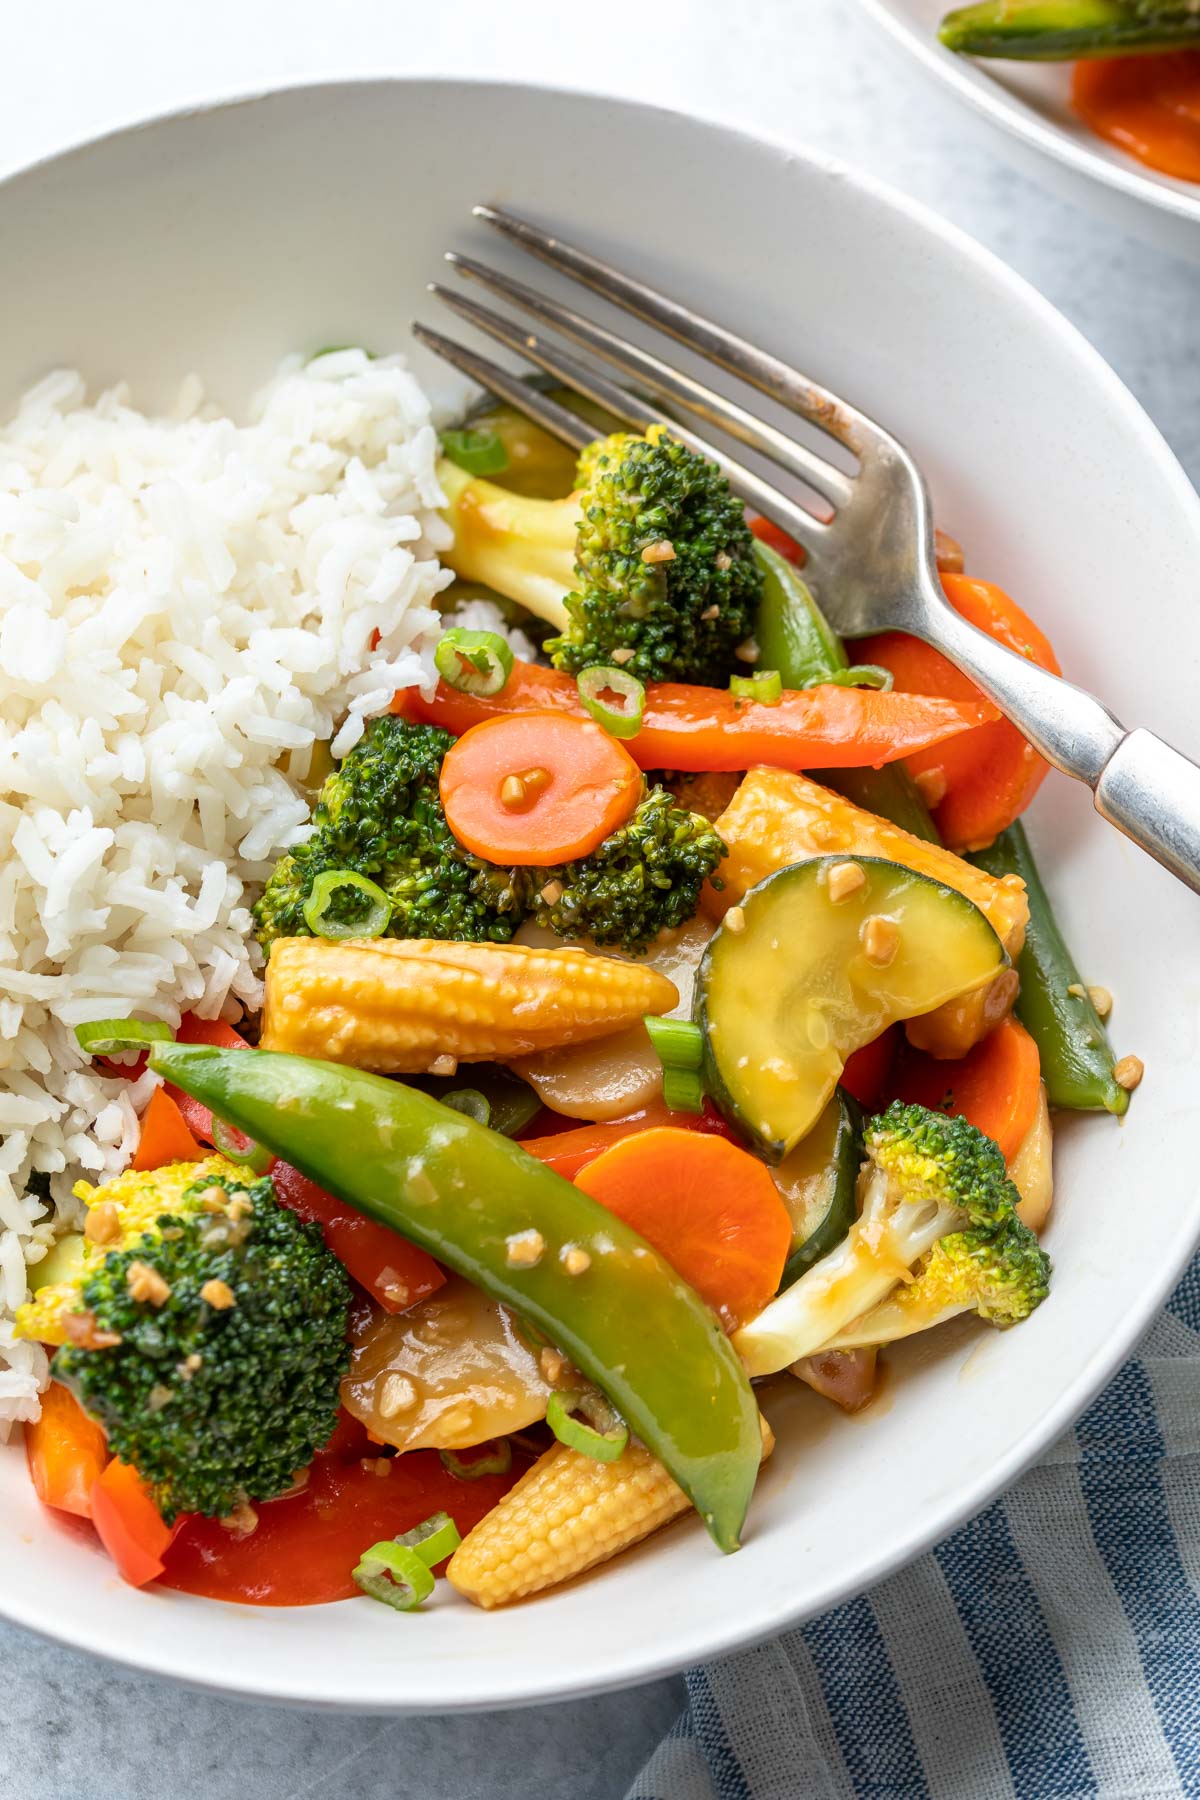 bowl of soy sauce covered veggies and white rice